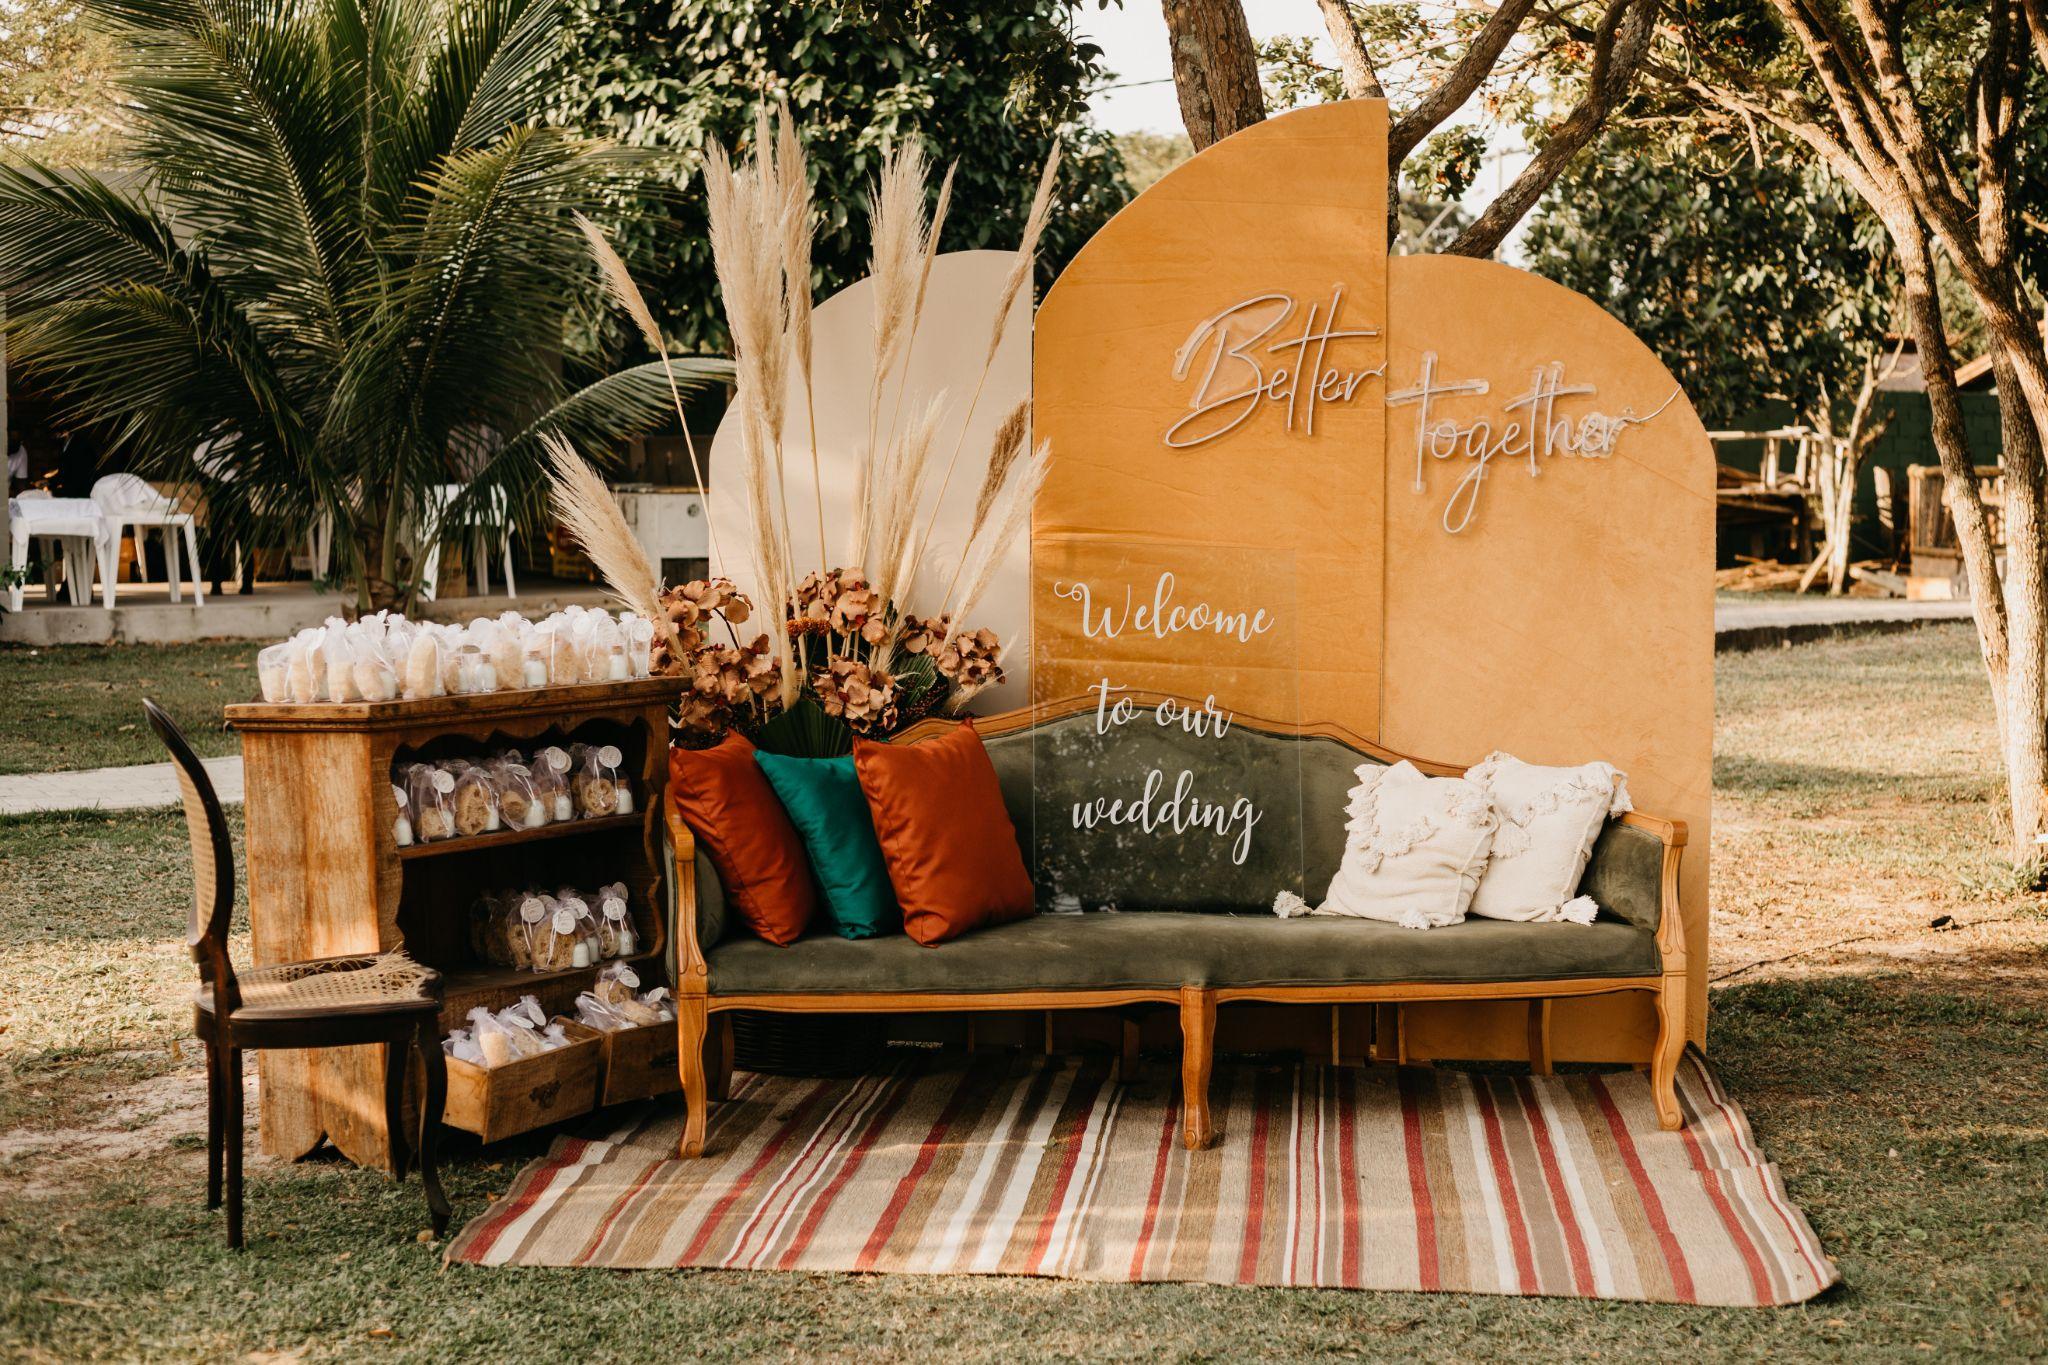 10 Creative & Memorable Ways to Welcome Your Guests at Your Wedding Reception